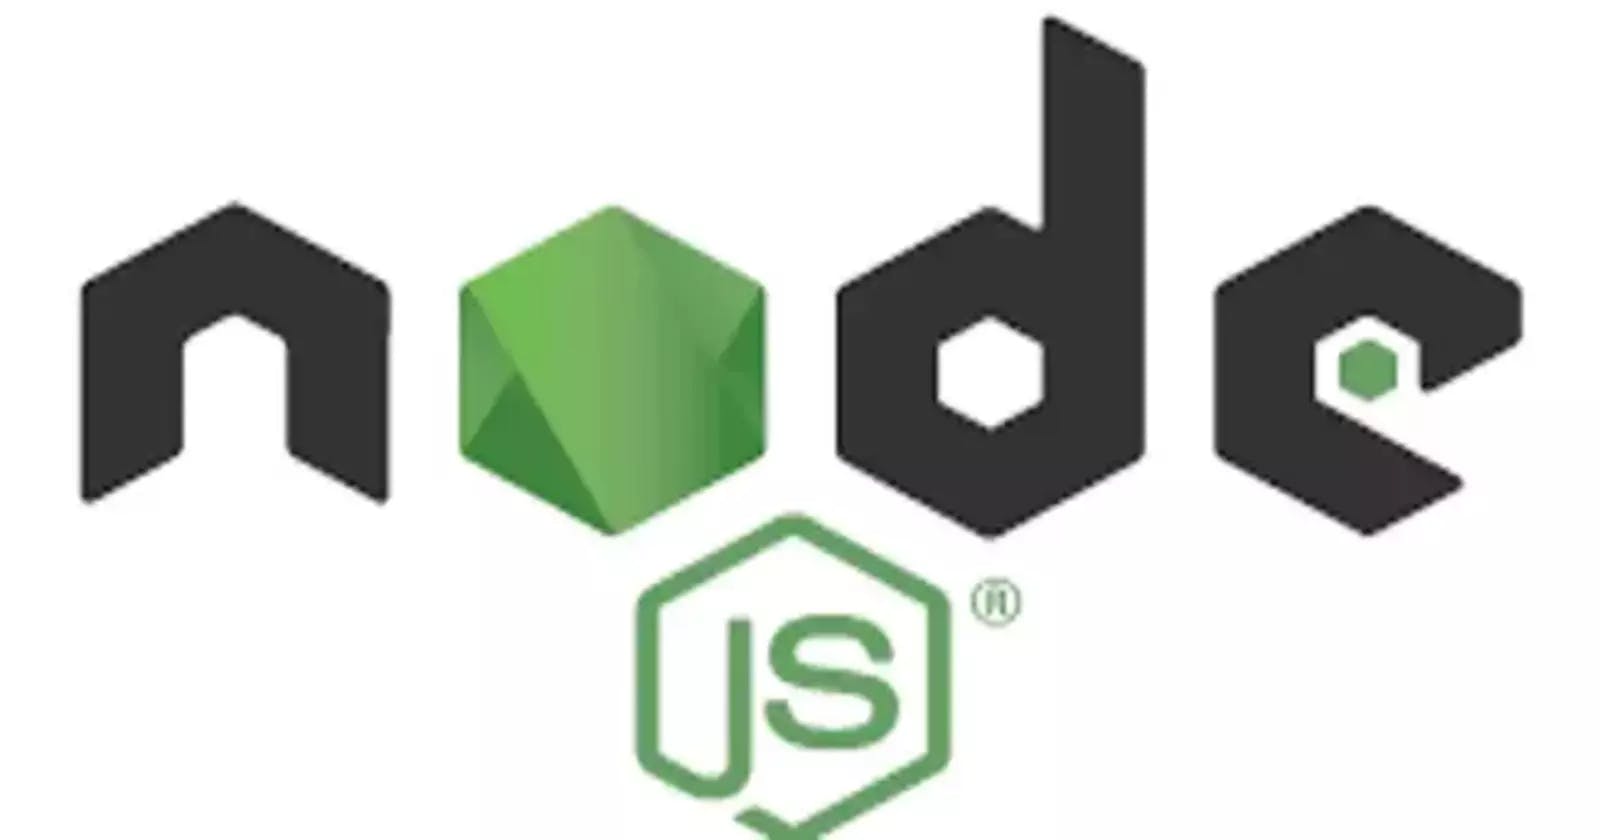 Create A Simple Crypto Currency Tracker With NodeJS